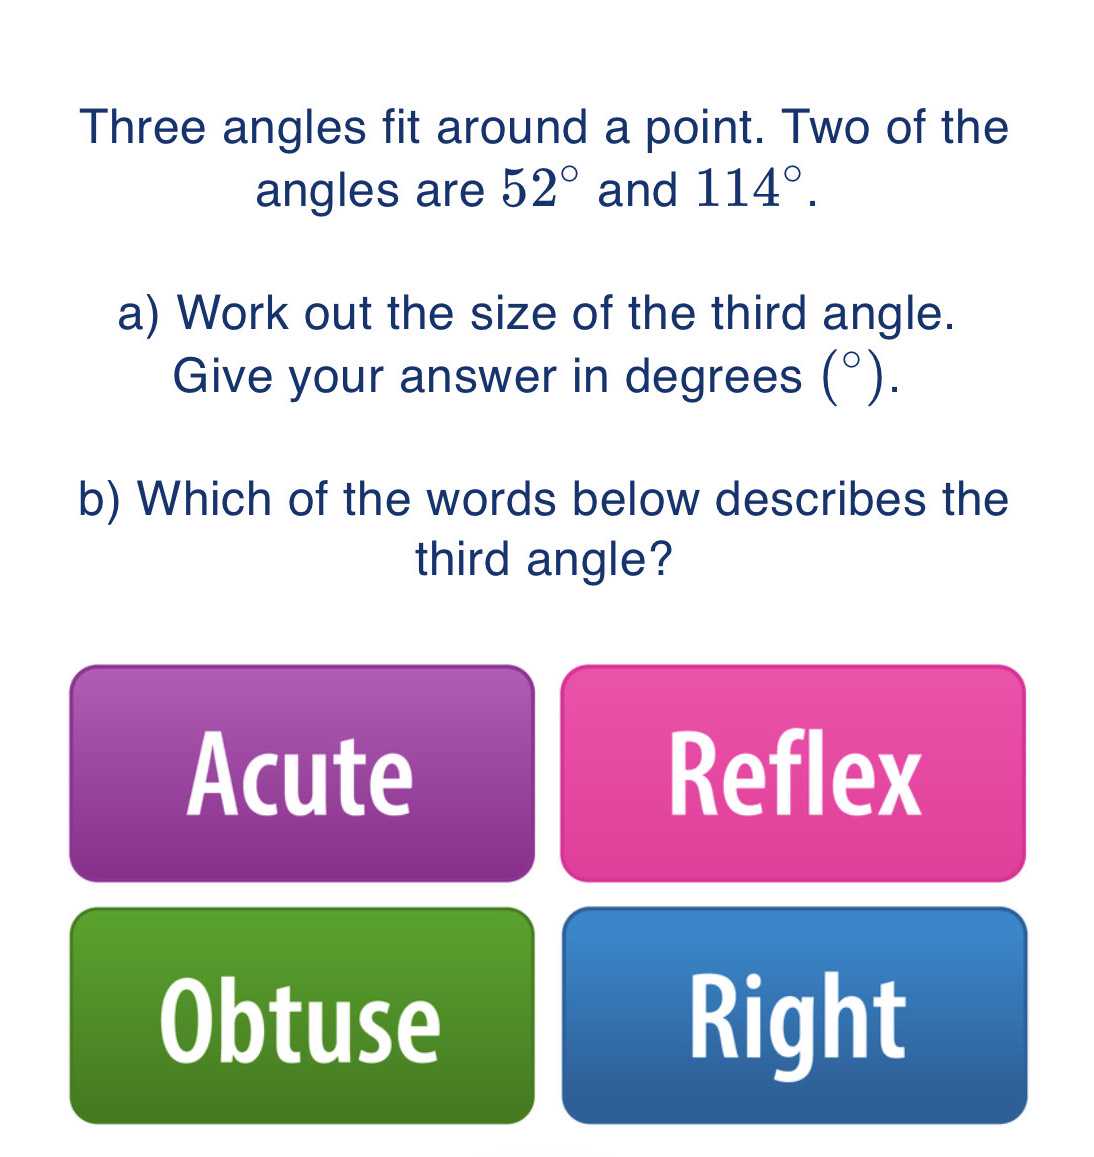 Three angles fit around a point. Two of the angles...